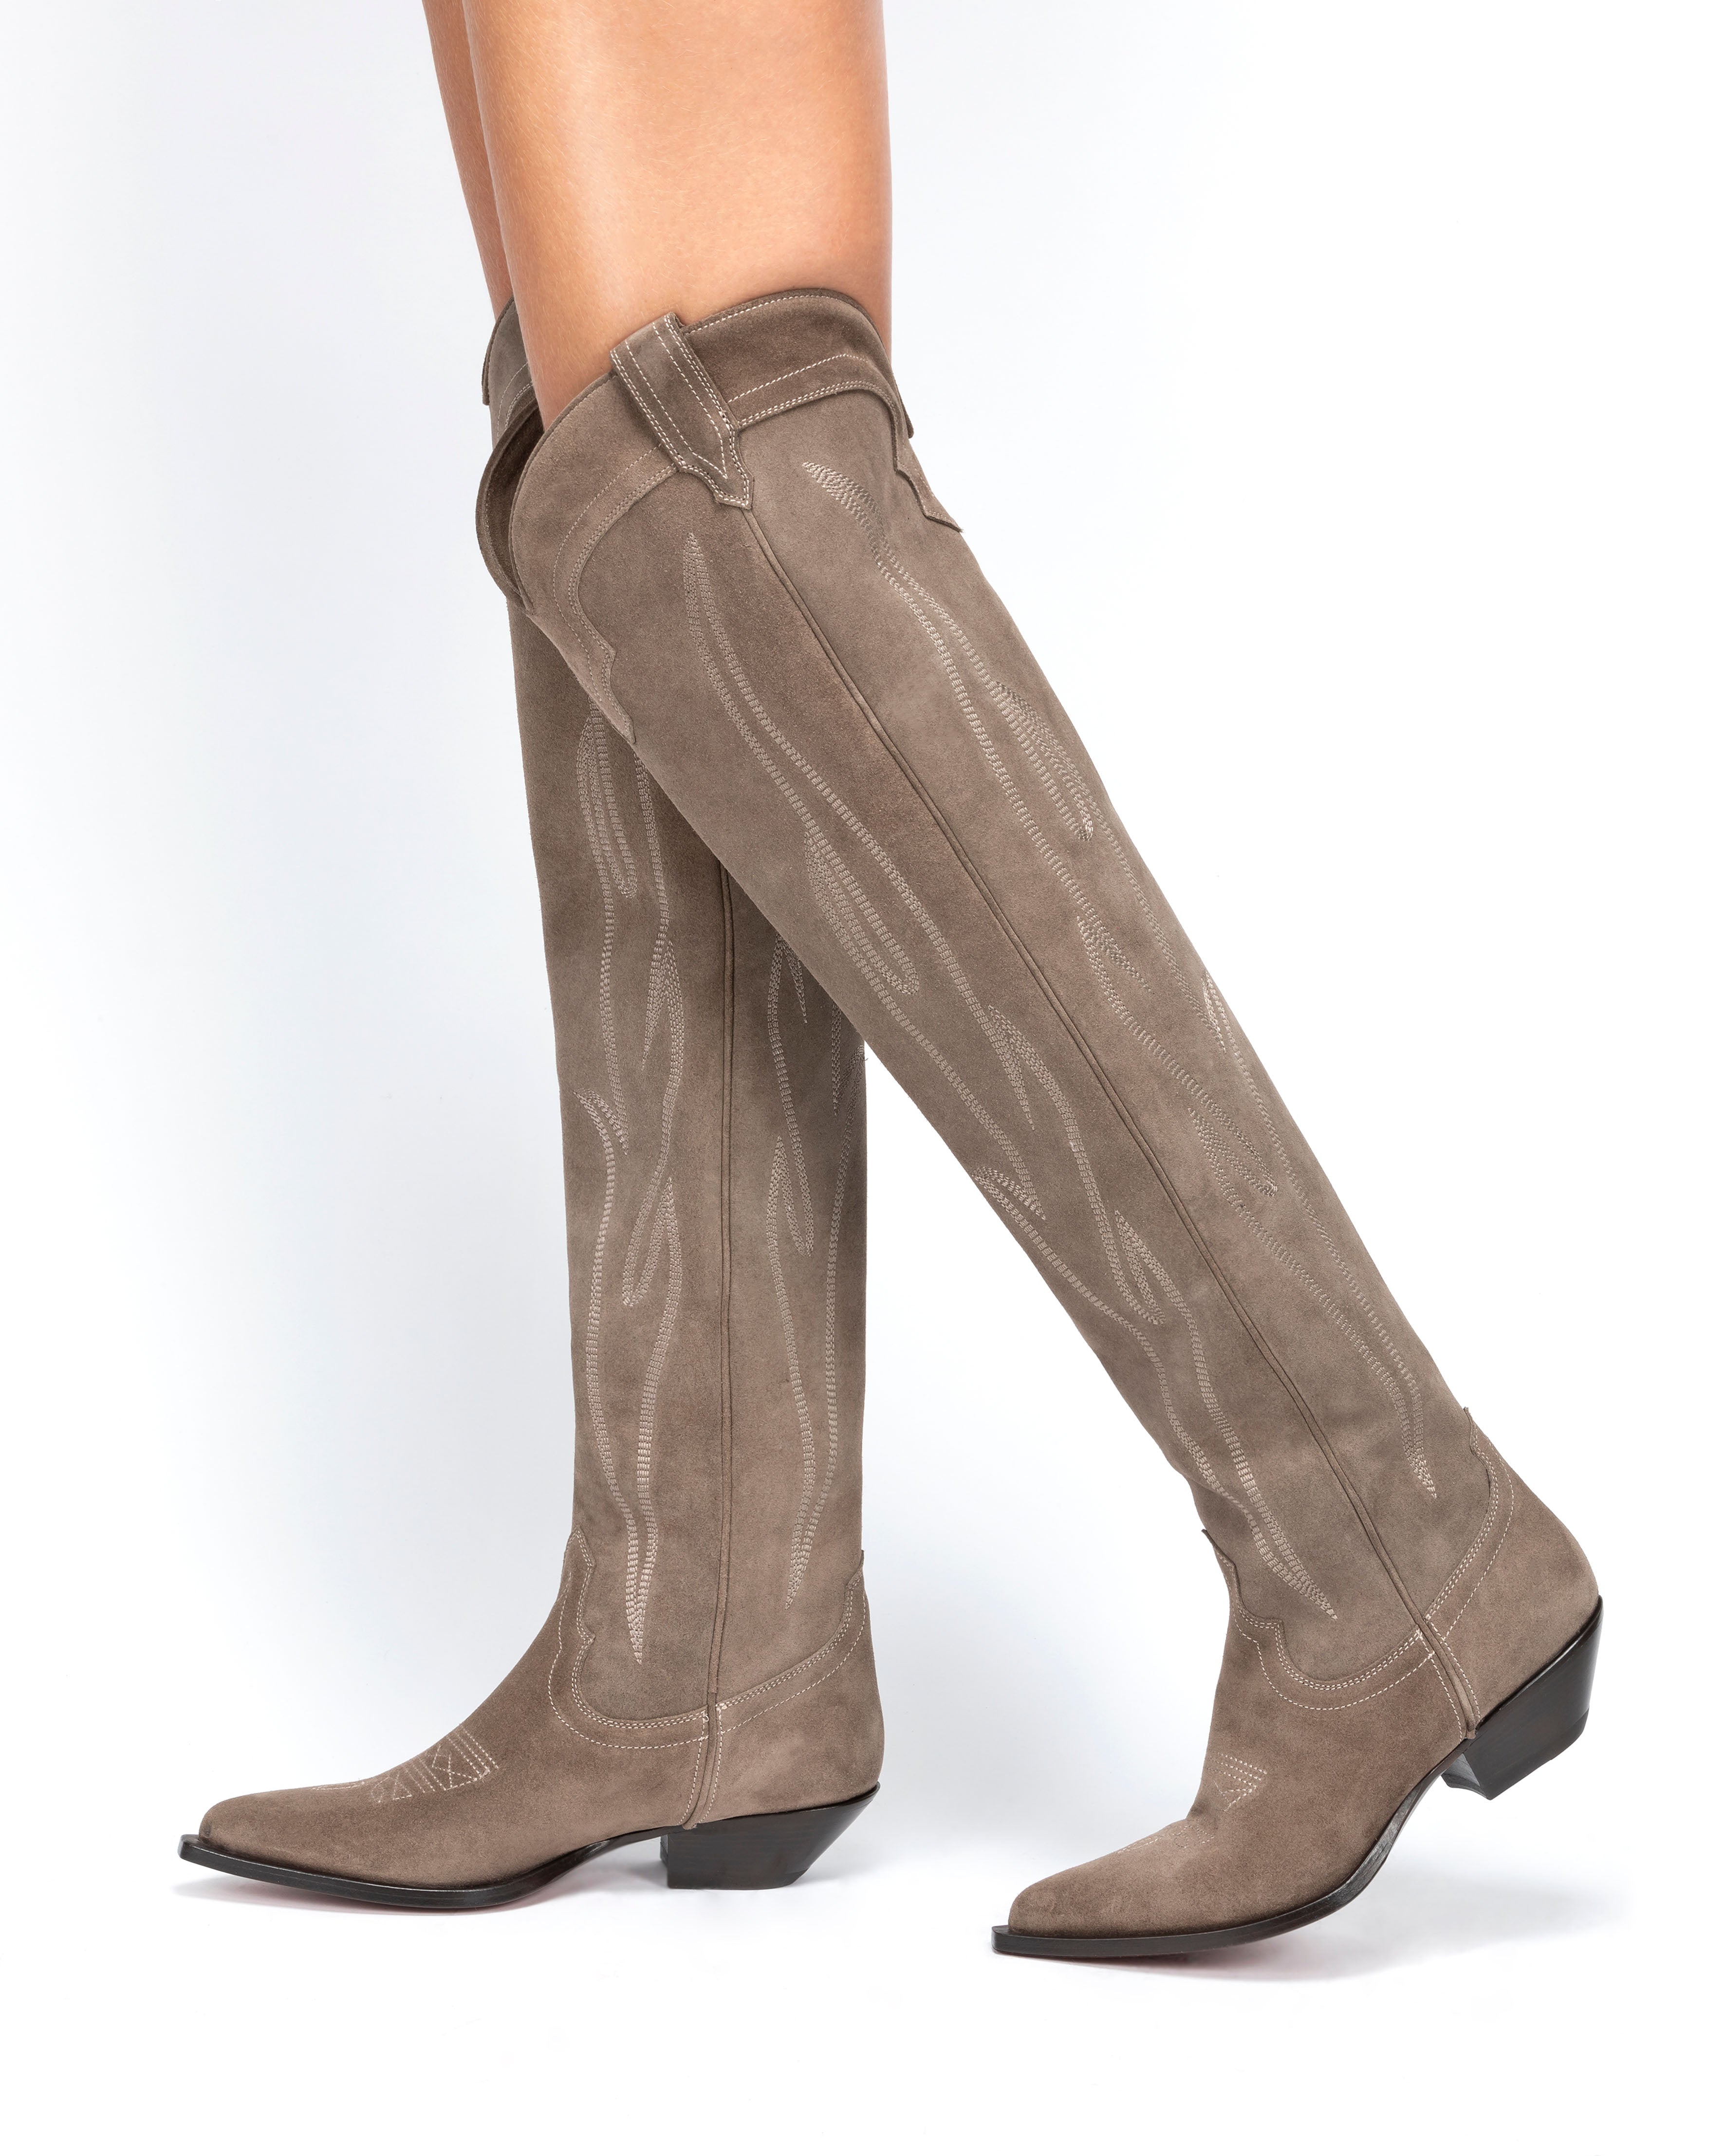 HERMOSA-Women_s-Over-The-Knee-Boots-in-Taupe-Velour-On-Tone-Embroidery_03